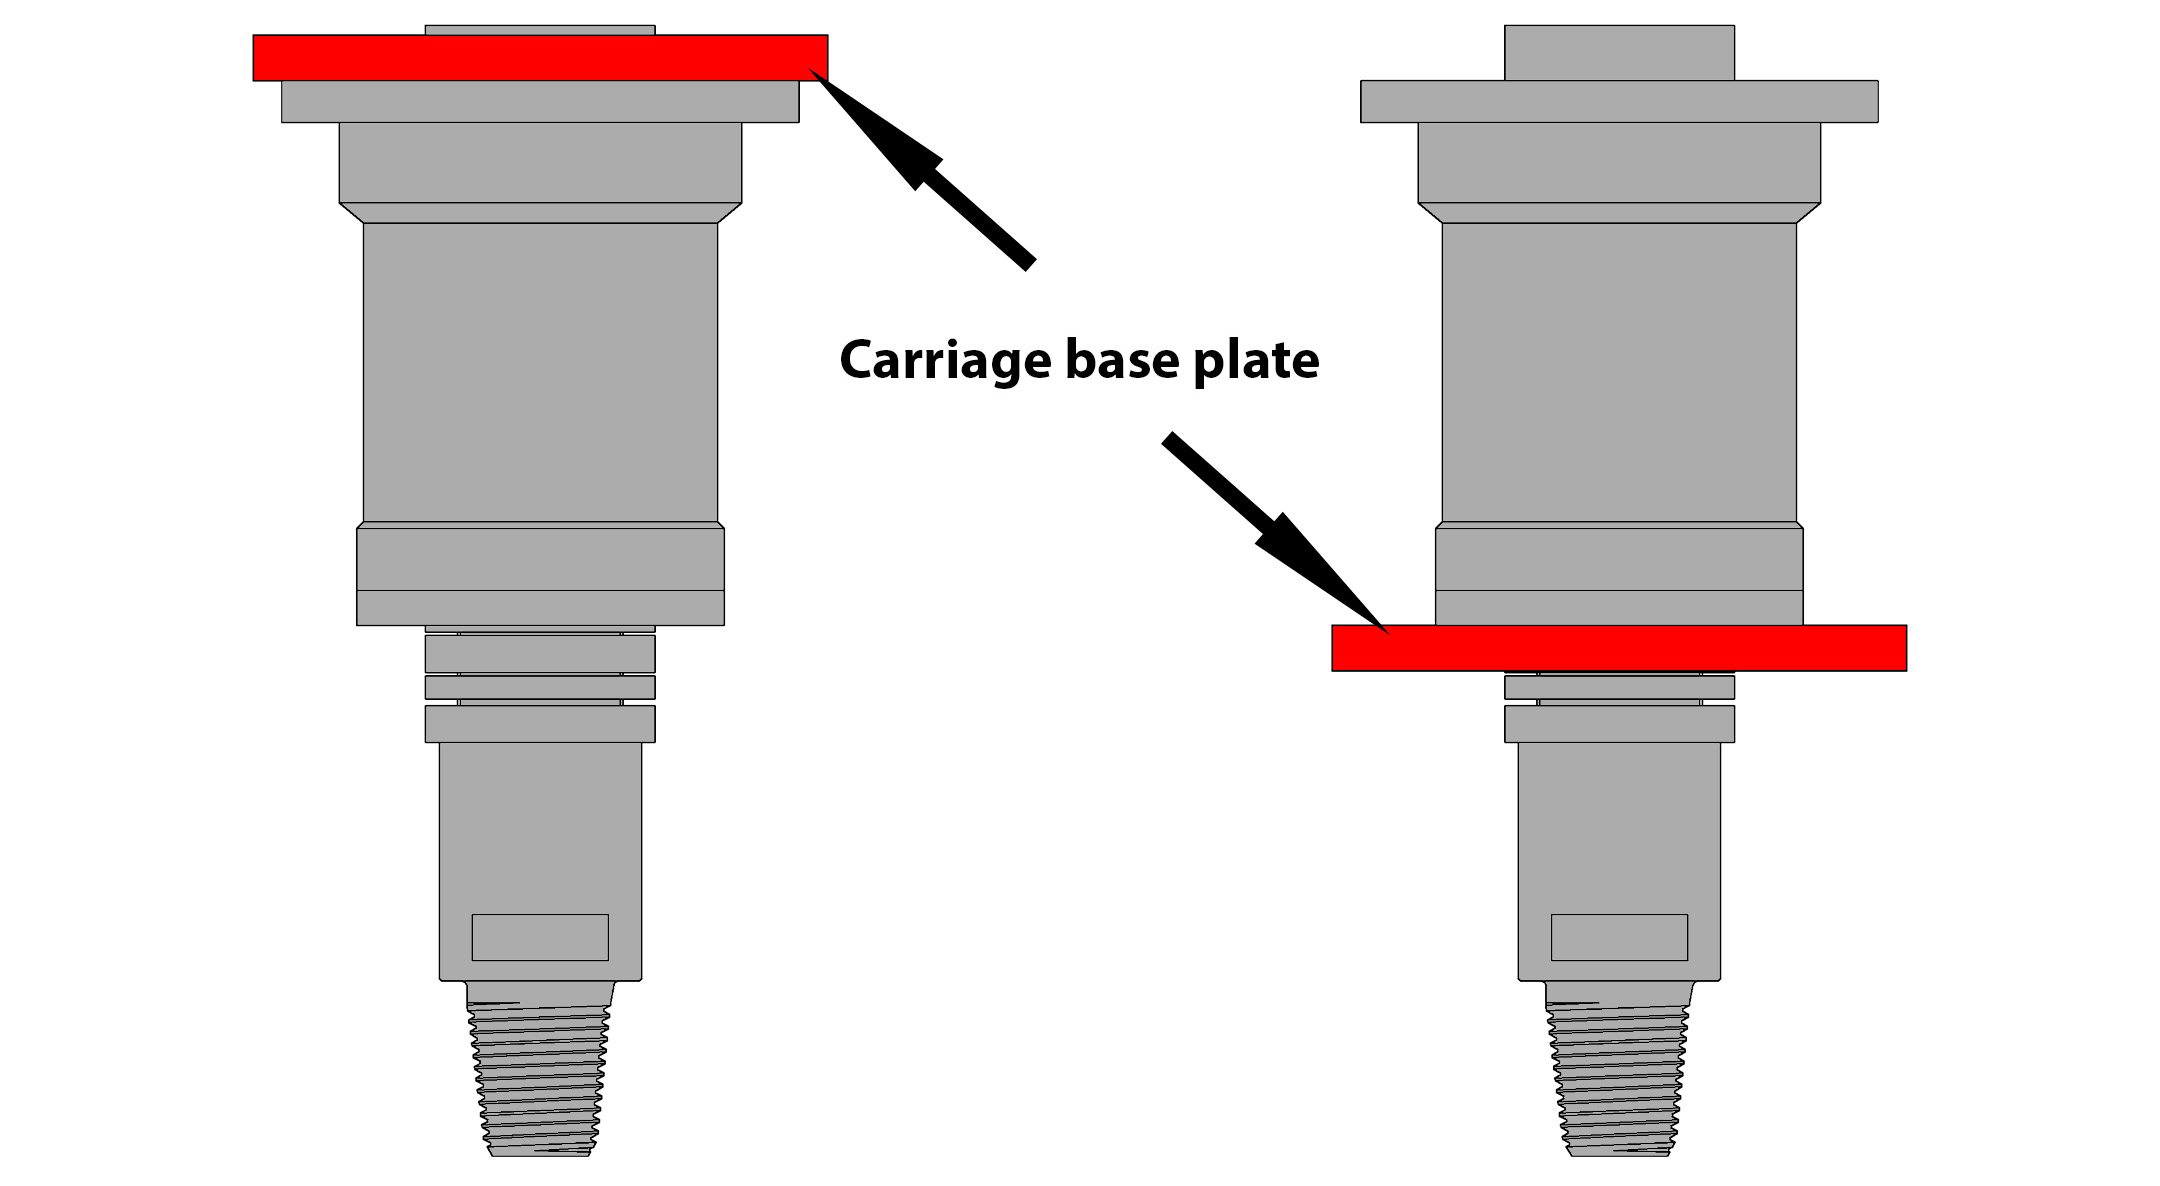 Swivel connection with the carriage